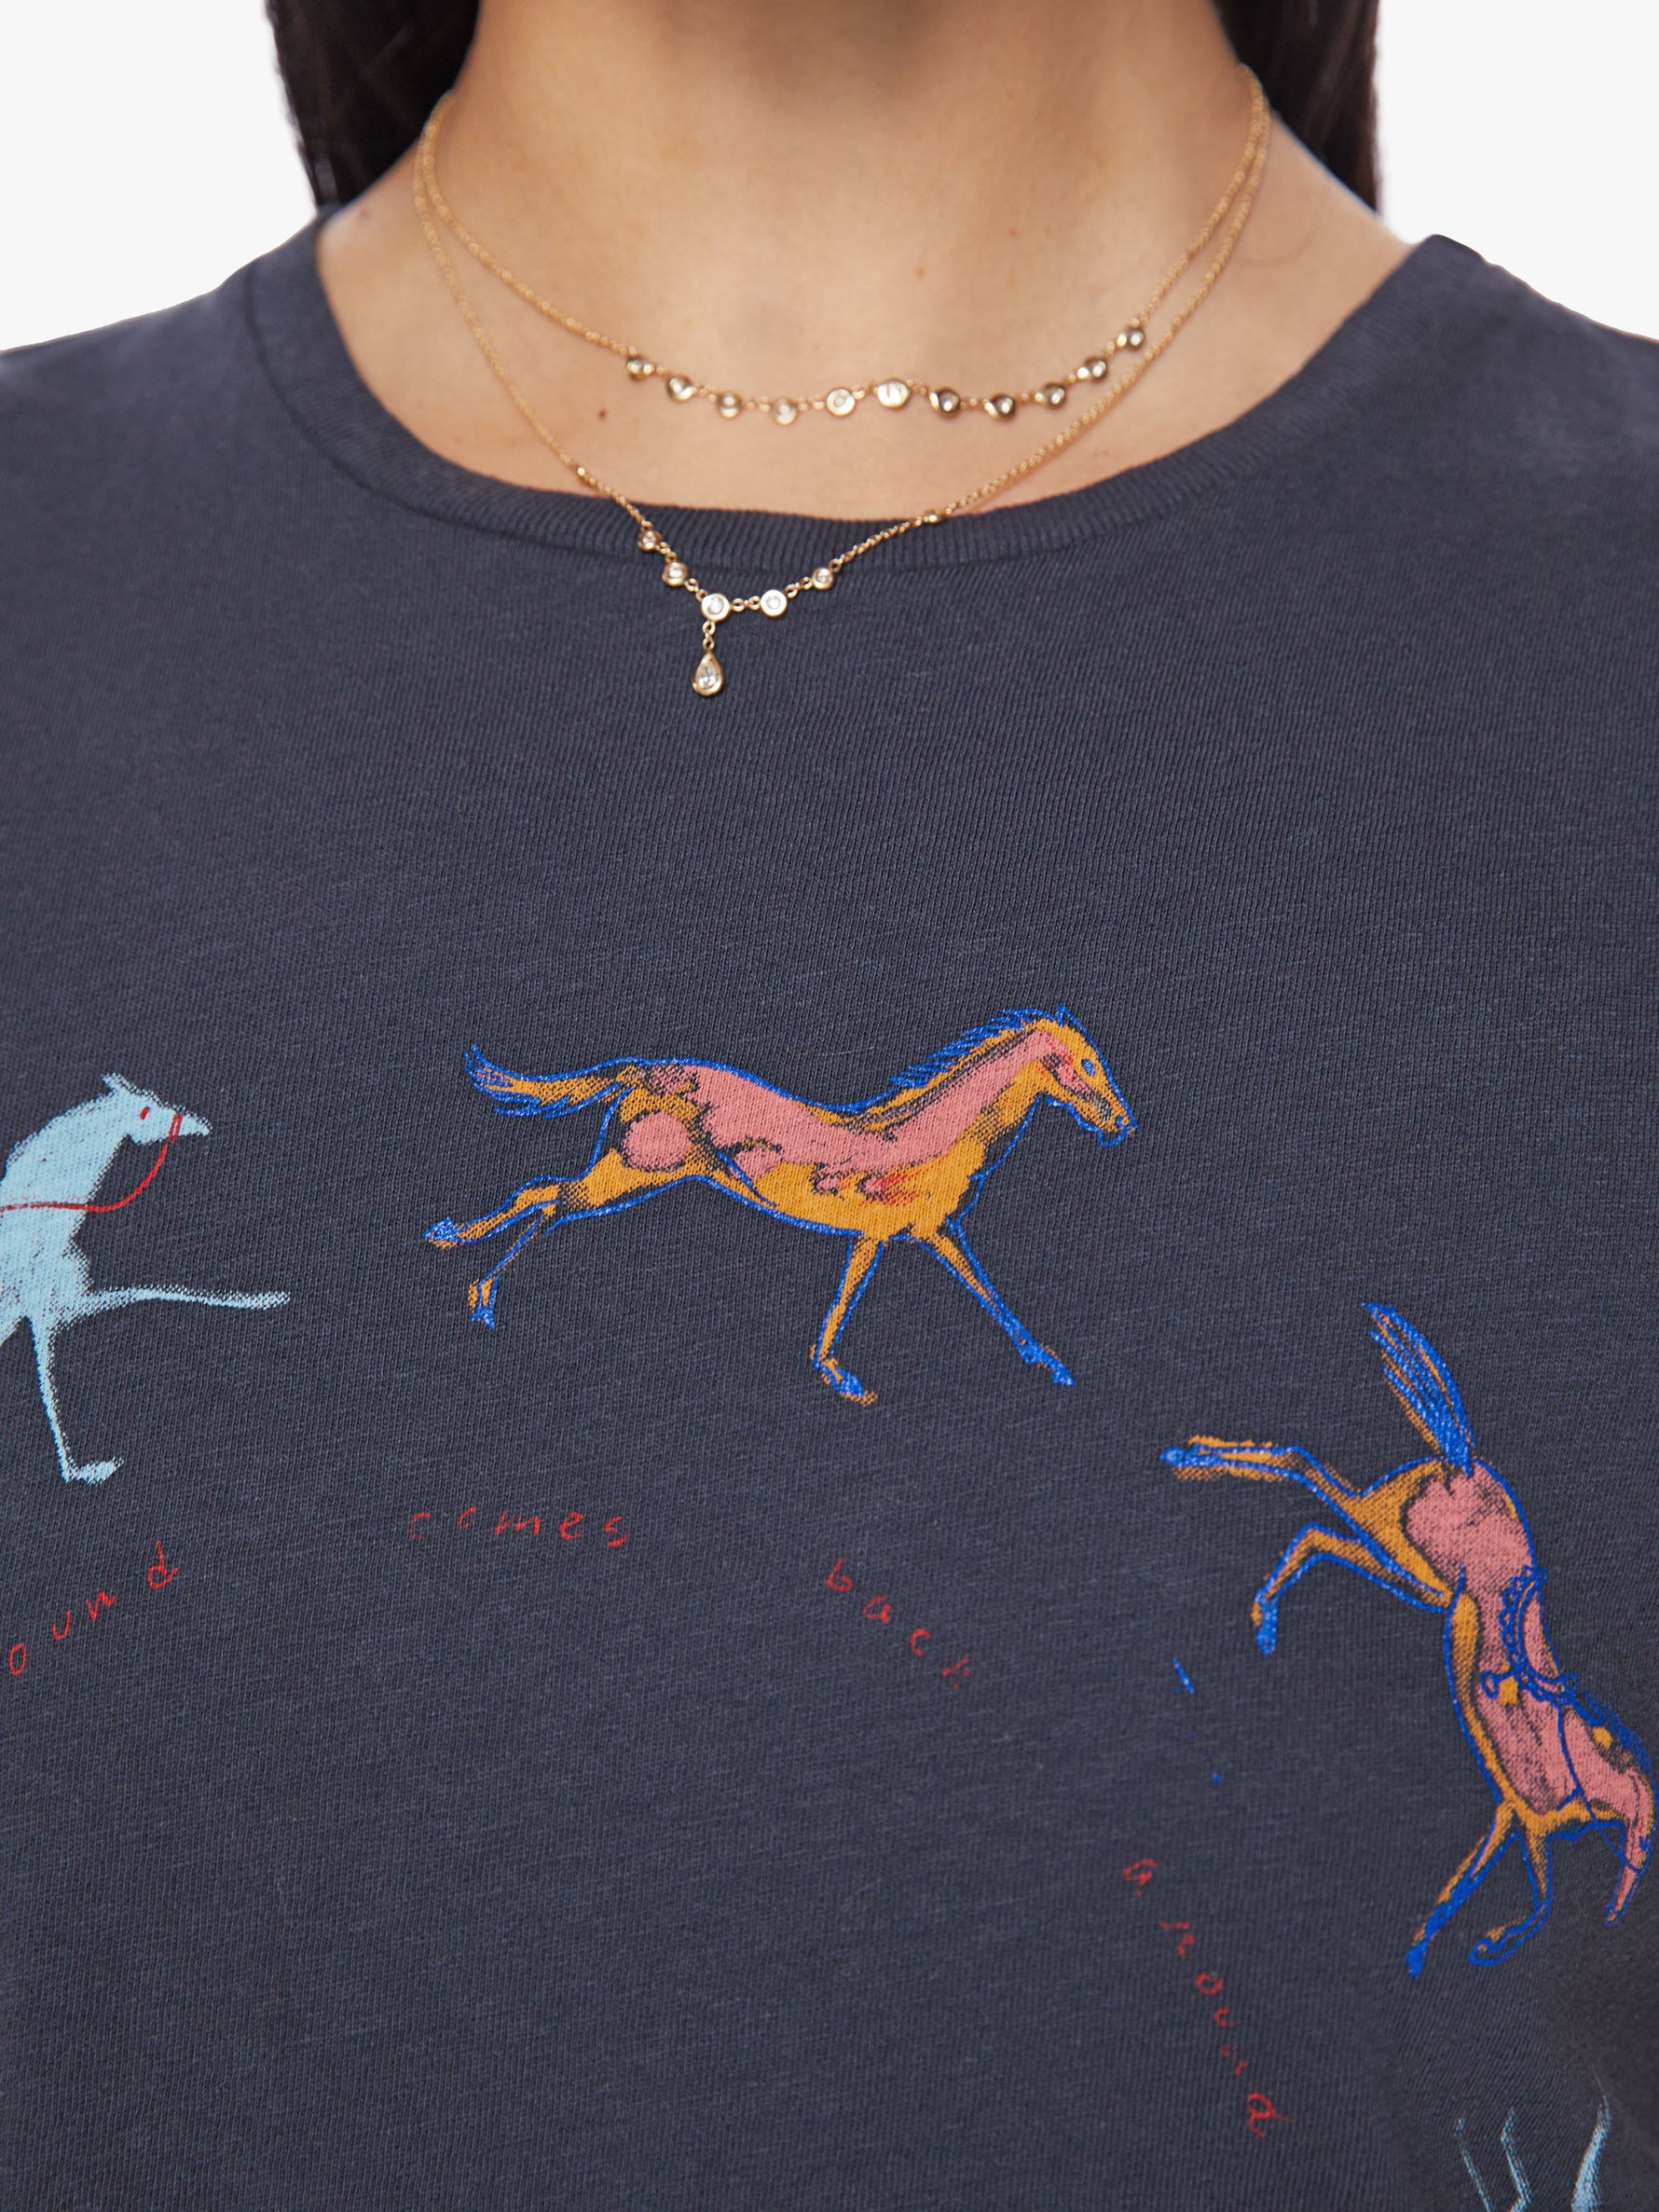 Cropped Itty Bitty Goodie Tee in Horsin Around